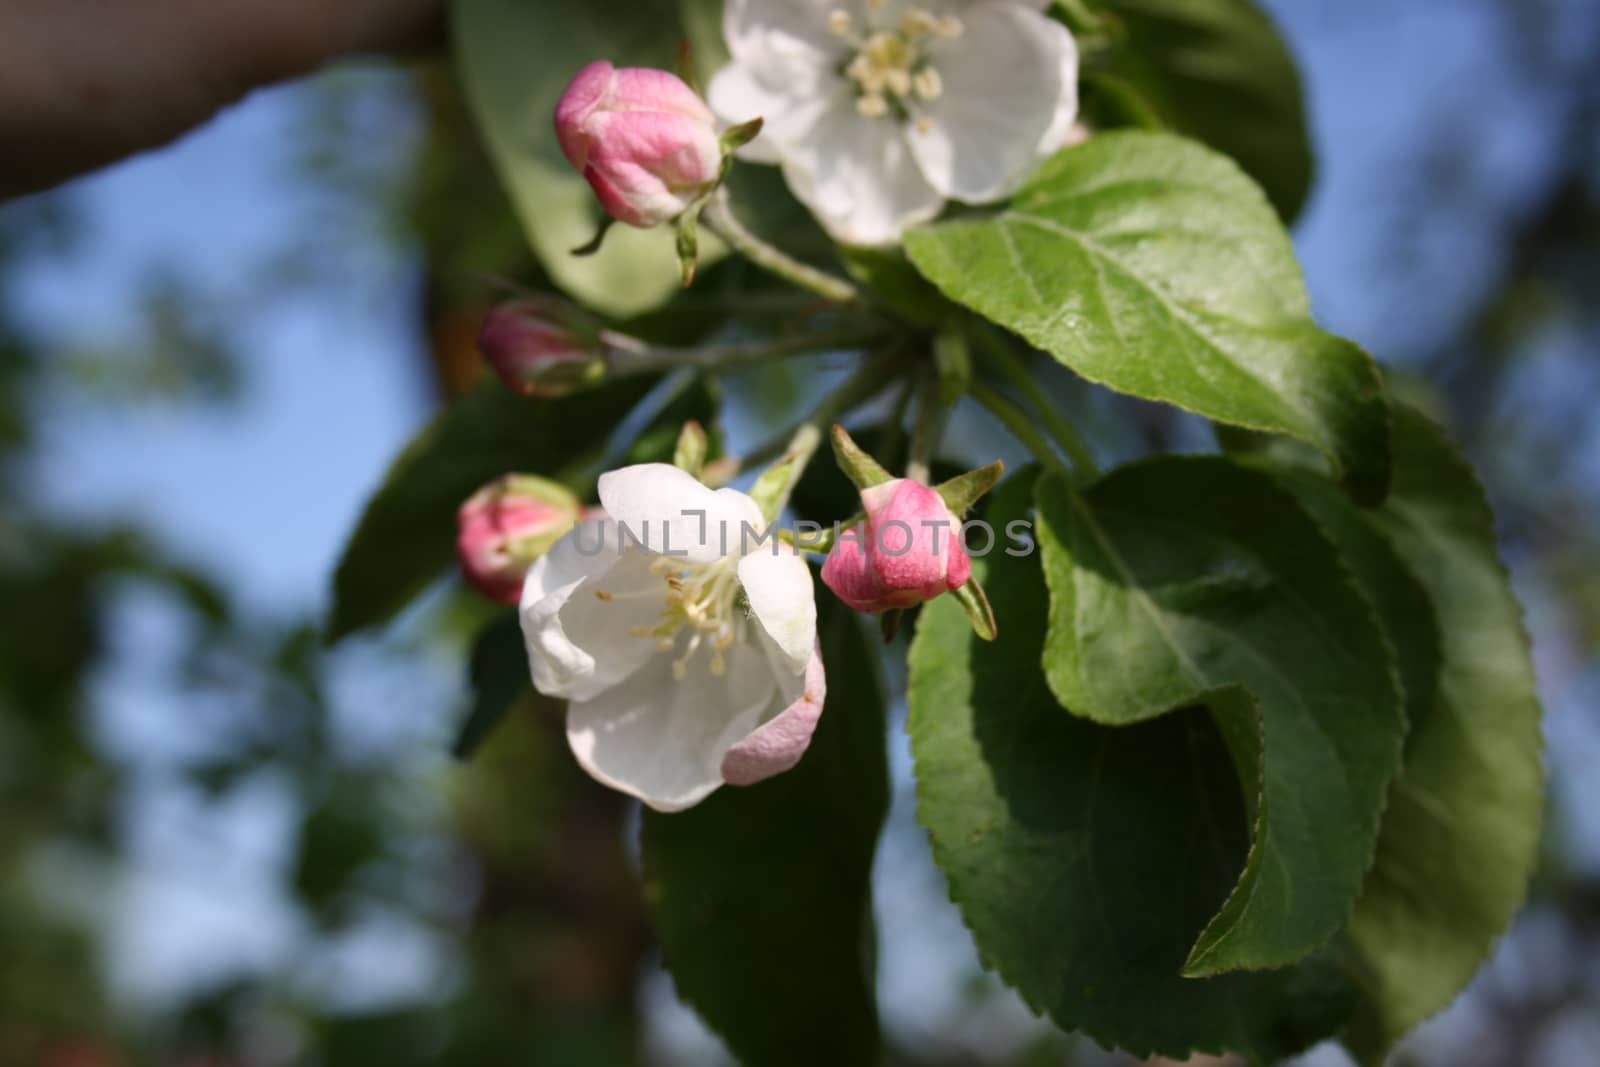 Spring blossom: branch of a blossoming apple tree on garden background